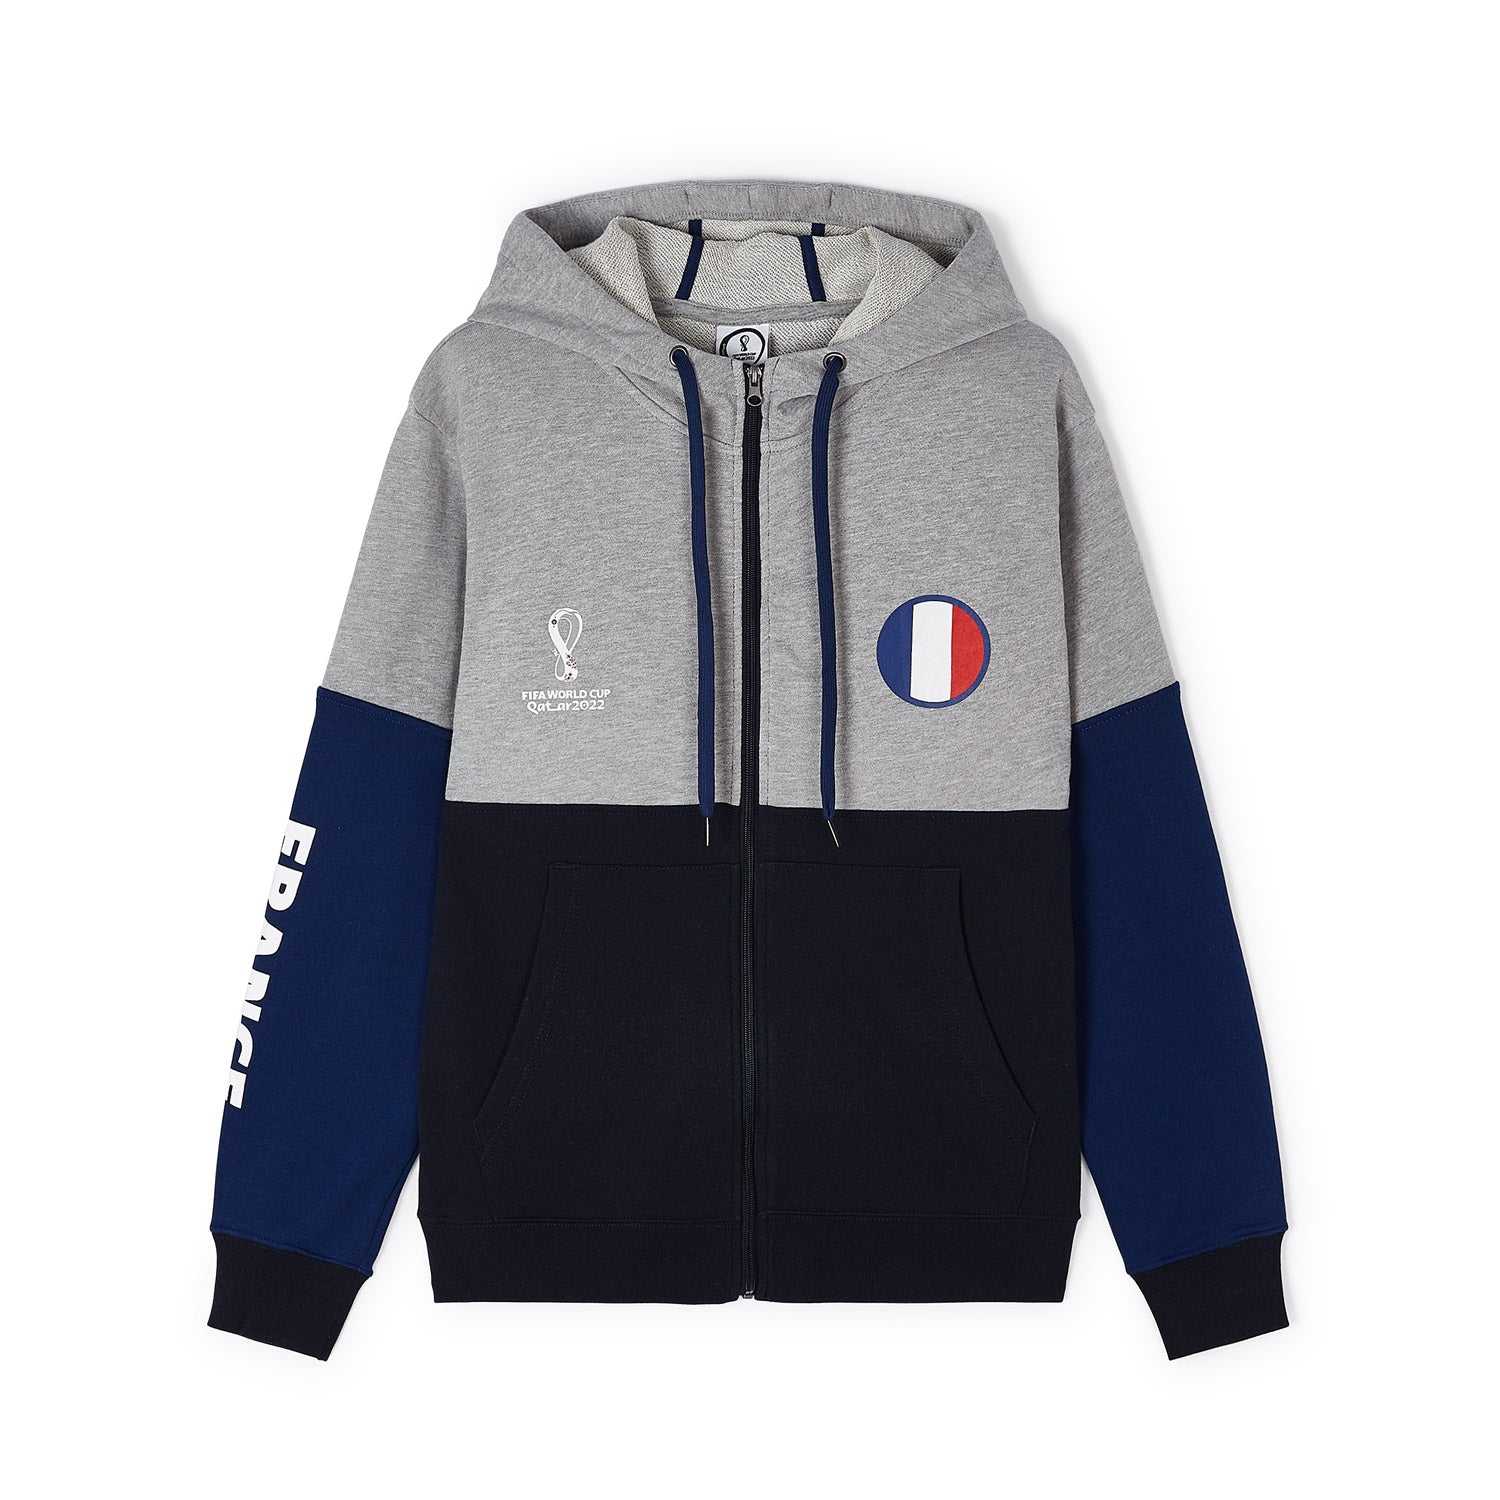 2022 World Cup France Contrast Navy Hoodie - Mens